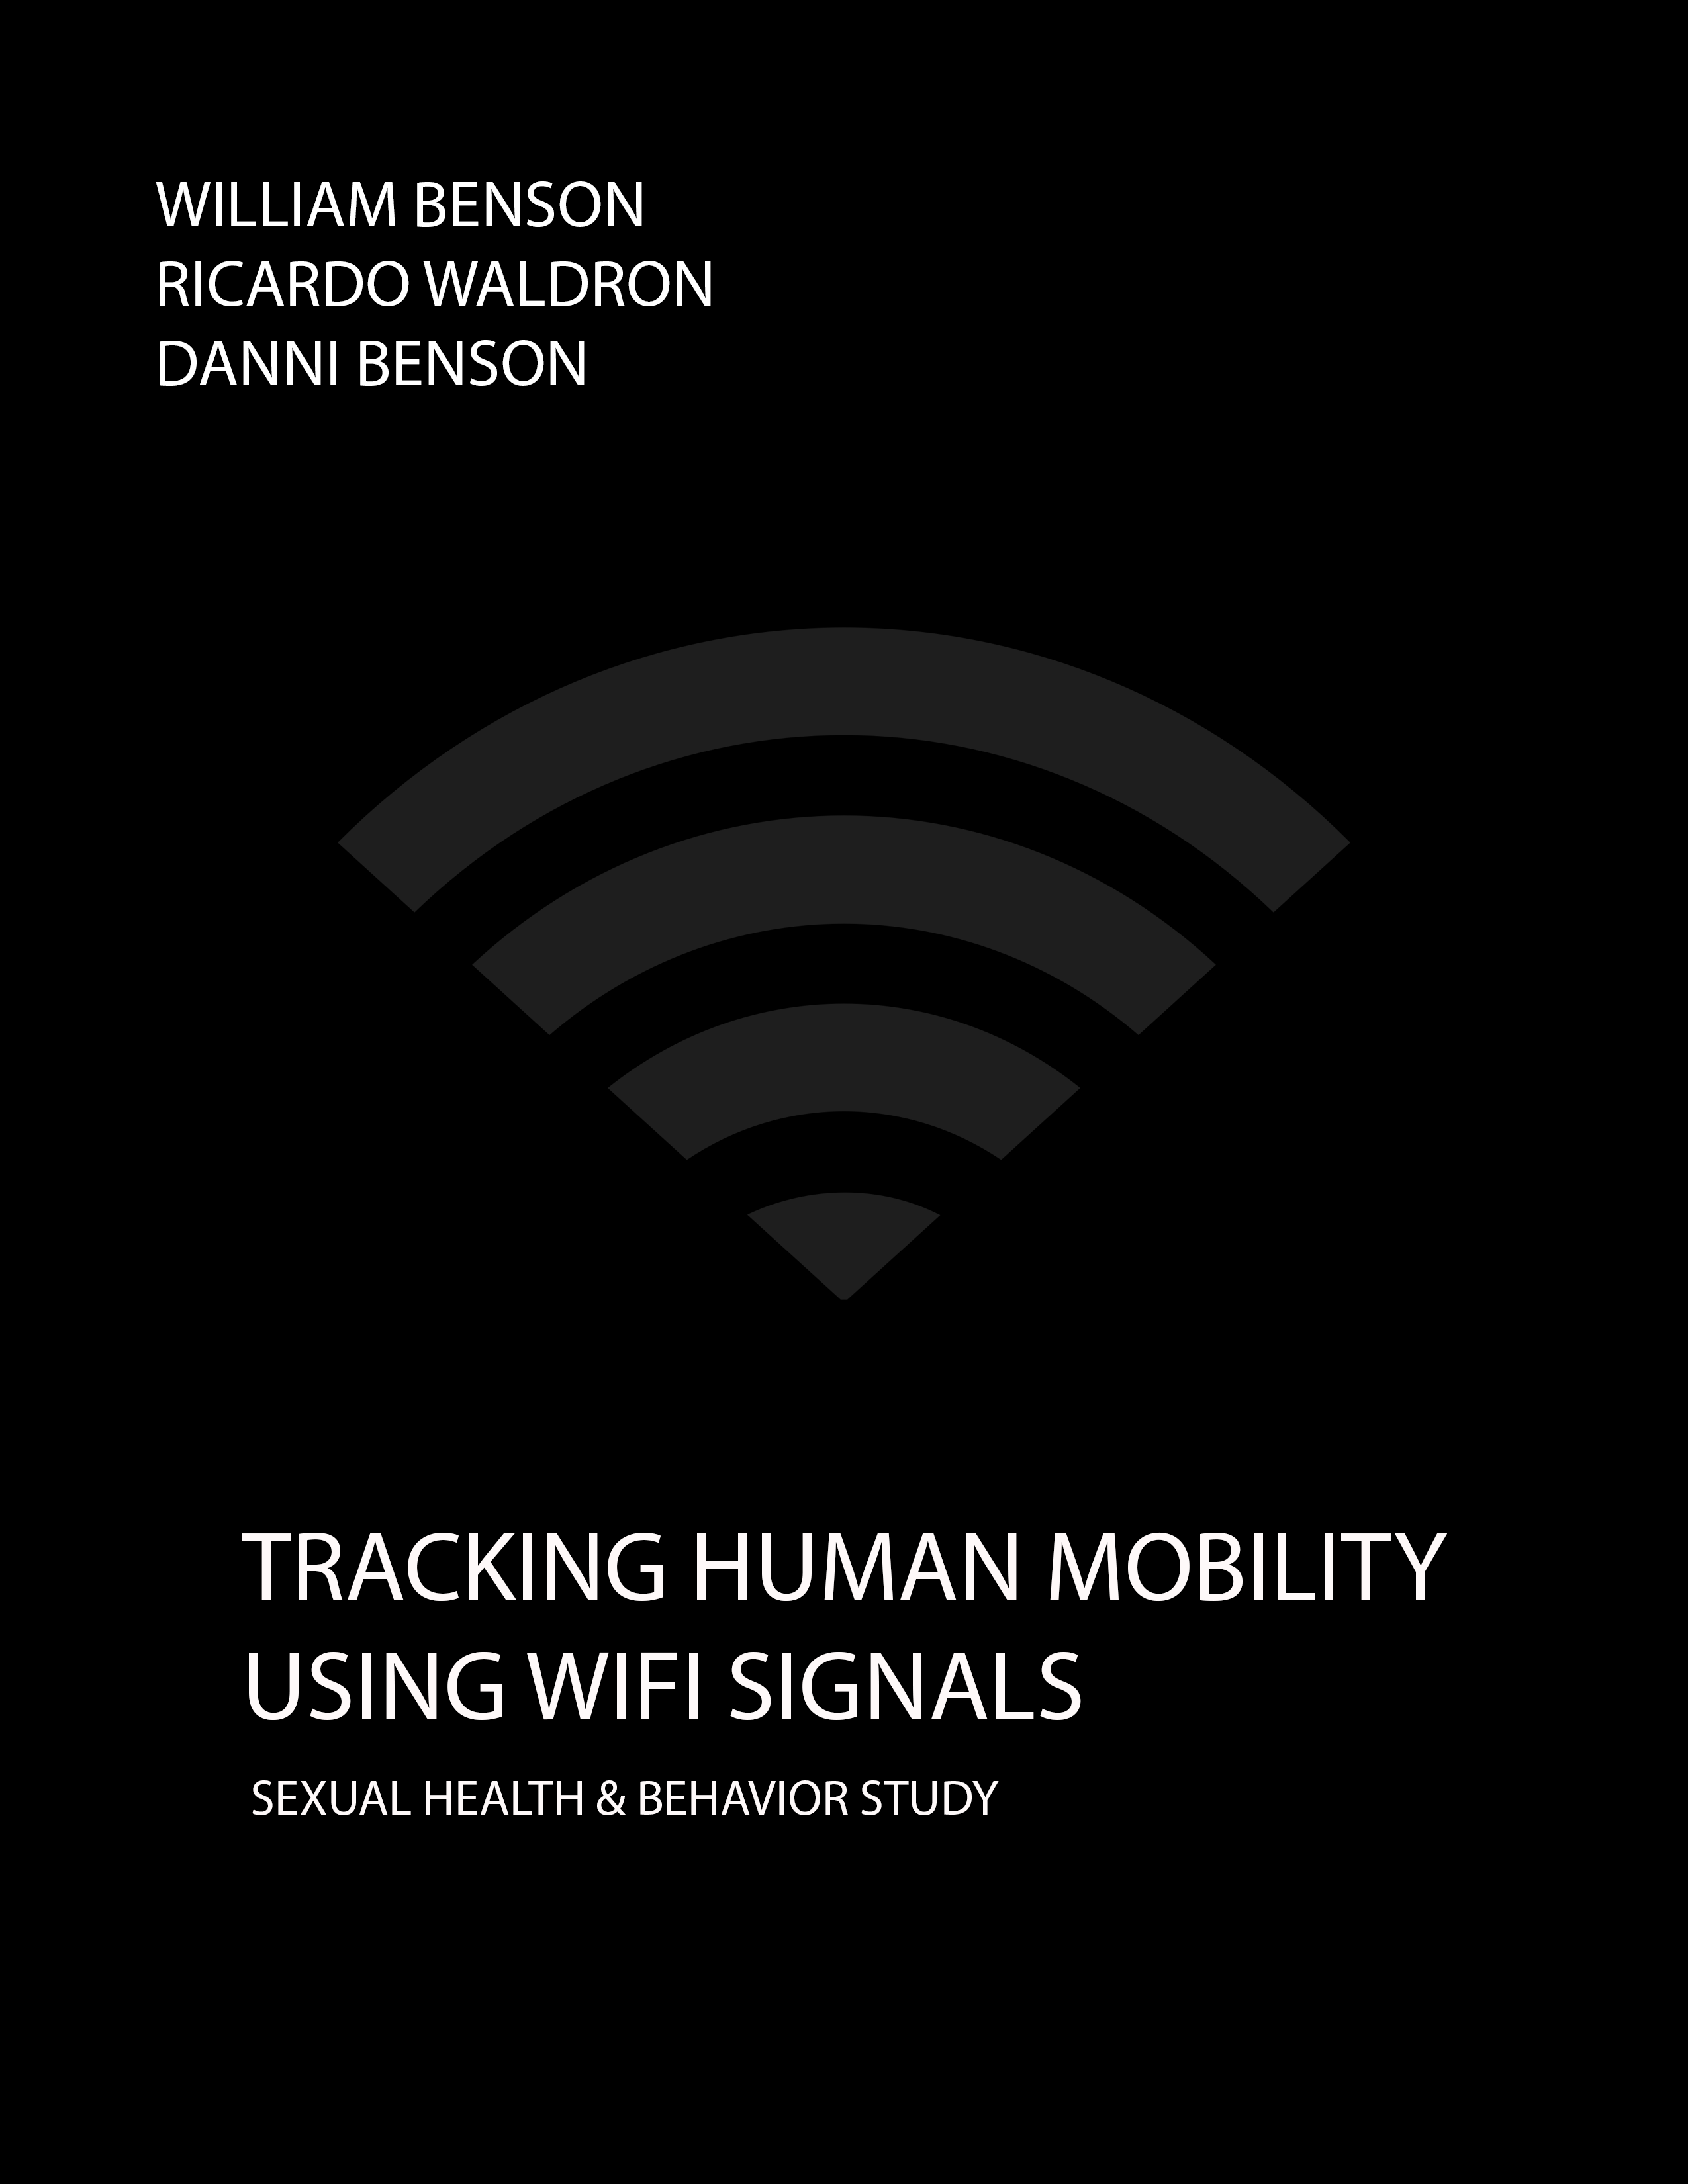 Tracking wifi signals for mobility